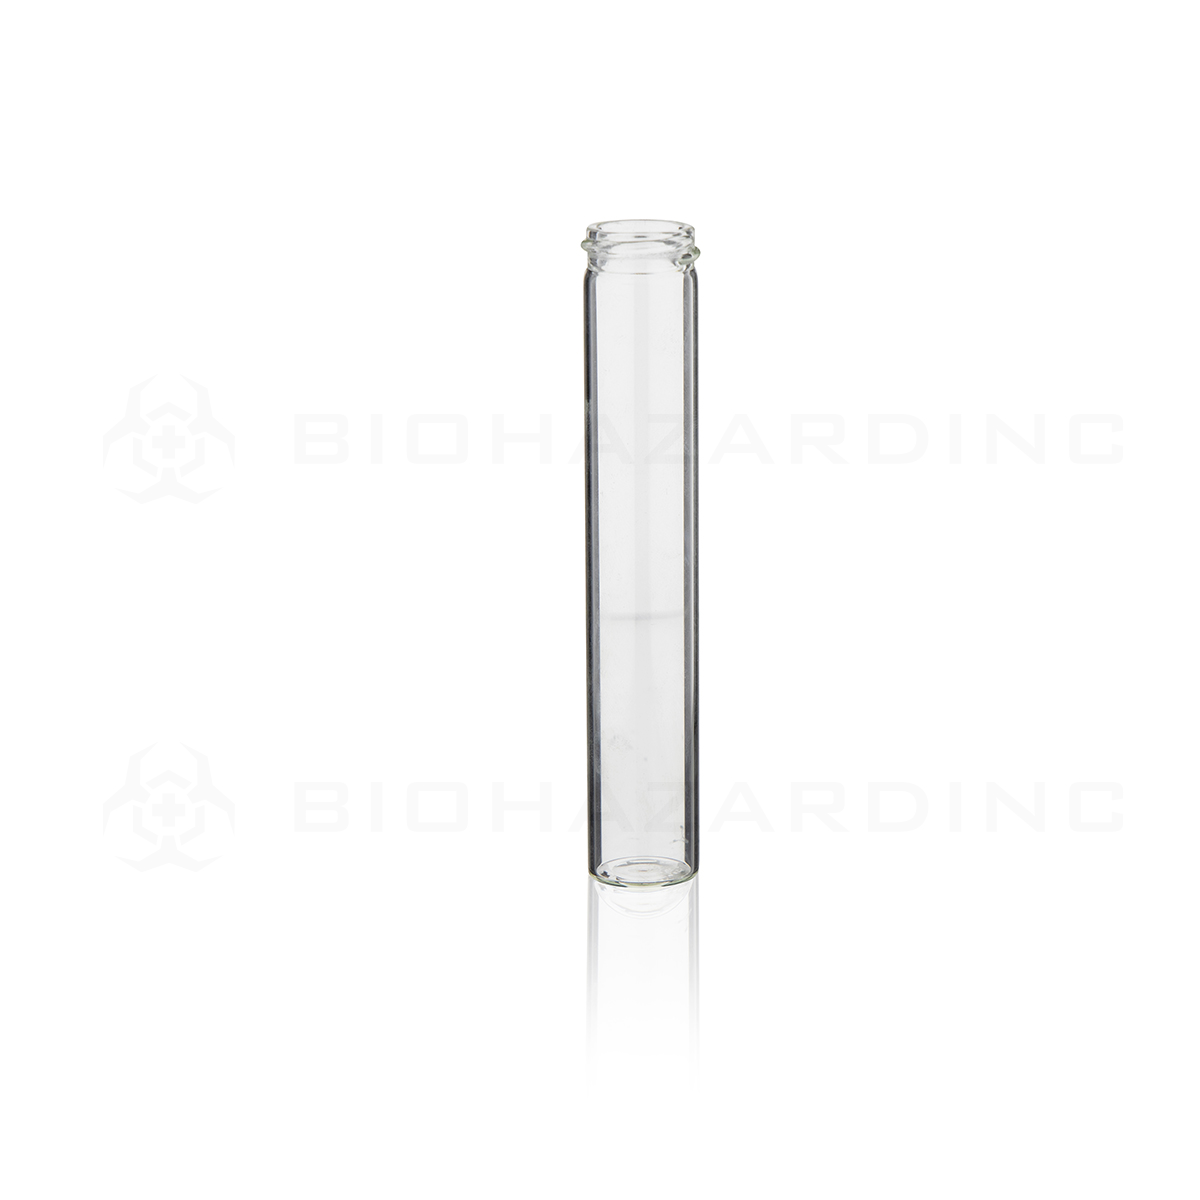 Glass Vial | Clear Glass Blunt Pre-Roll Tube | 22mm - 120mm - 144 Count Glass Vial Biohazard Inc   